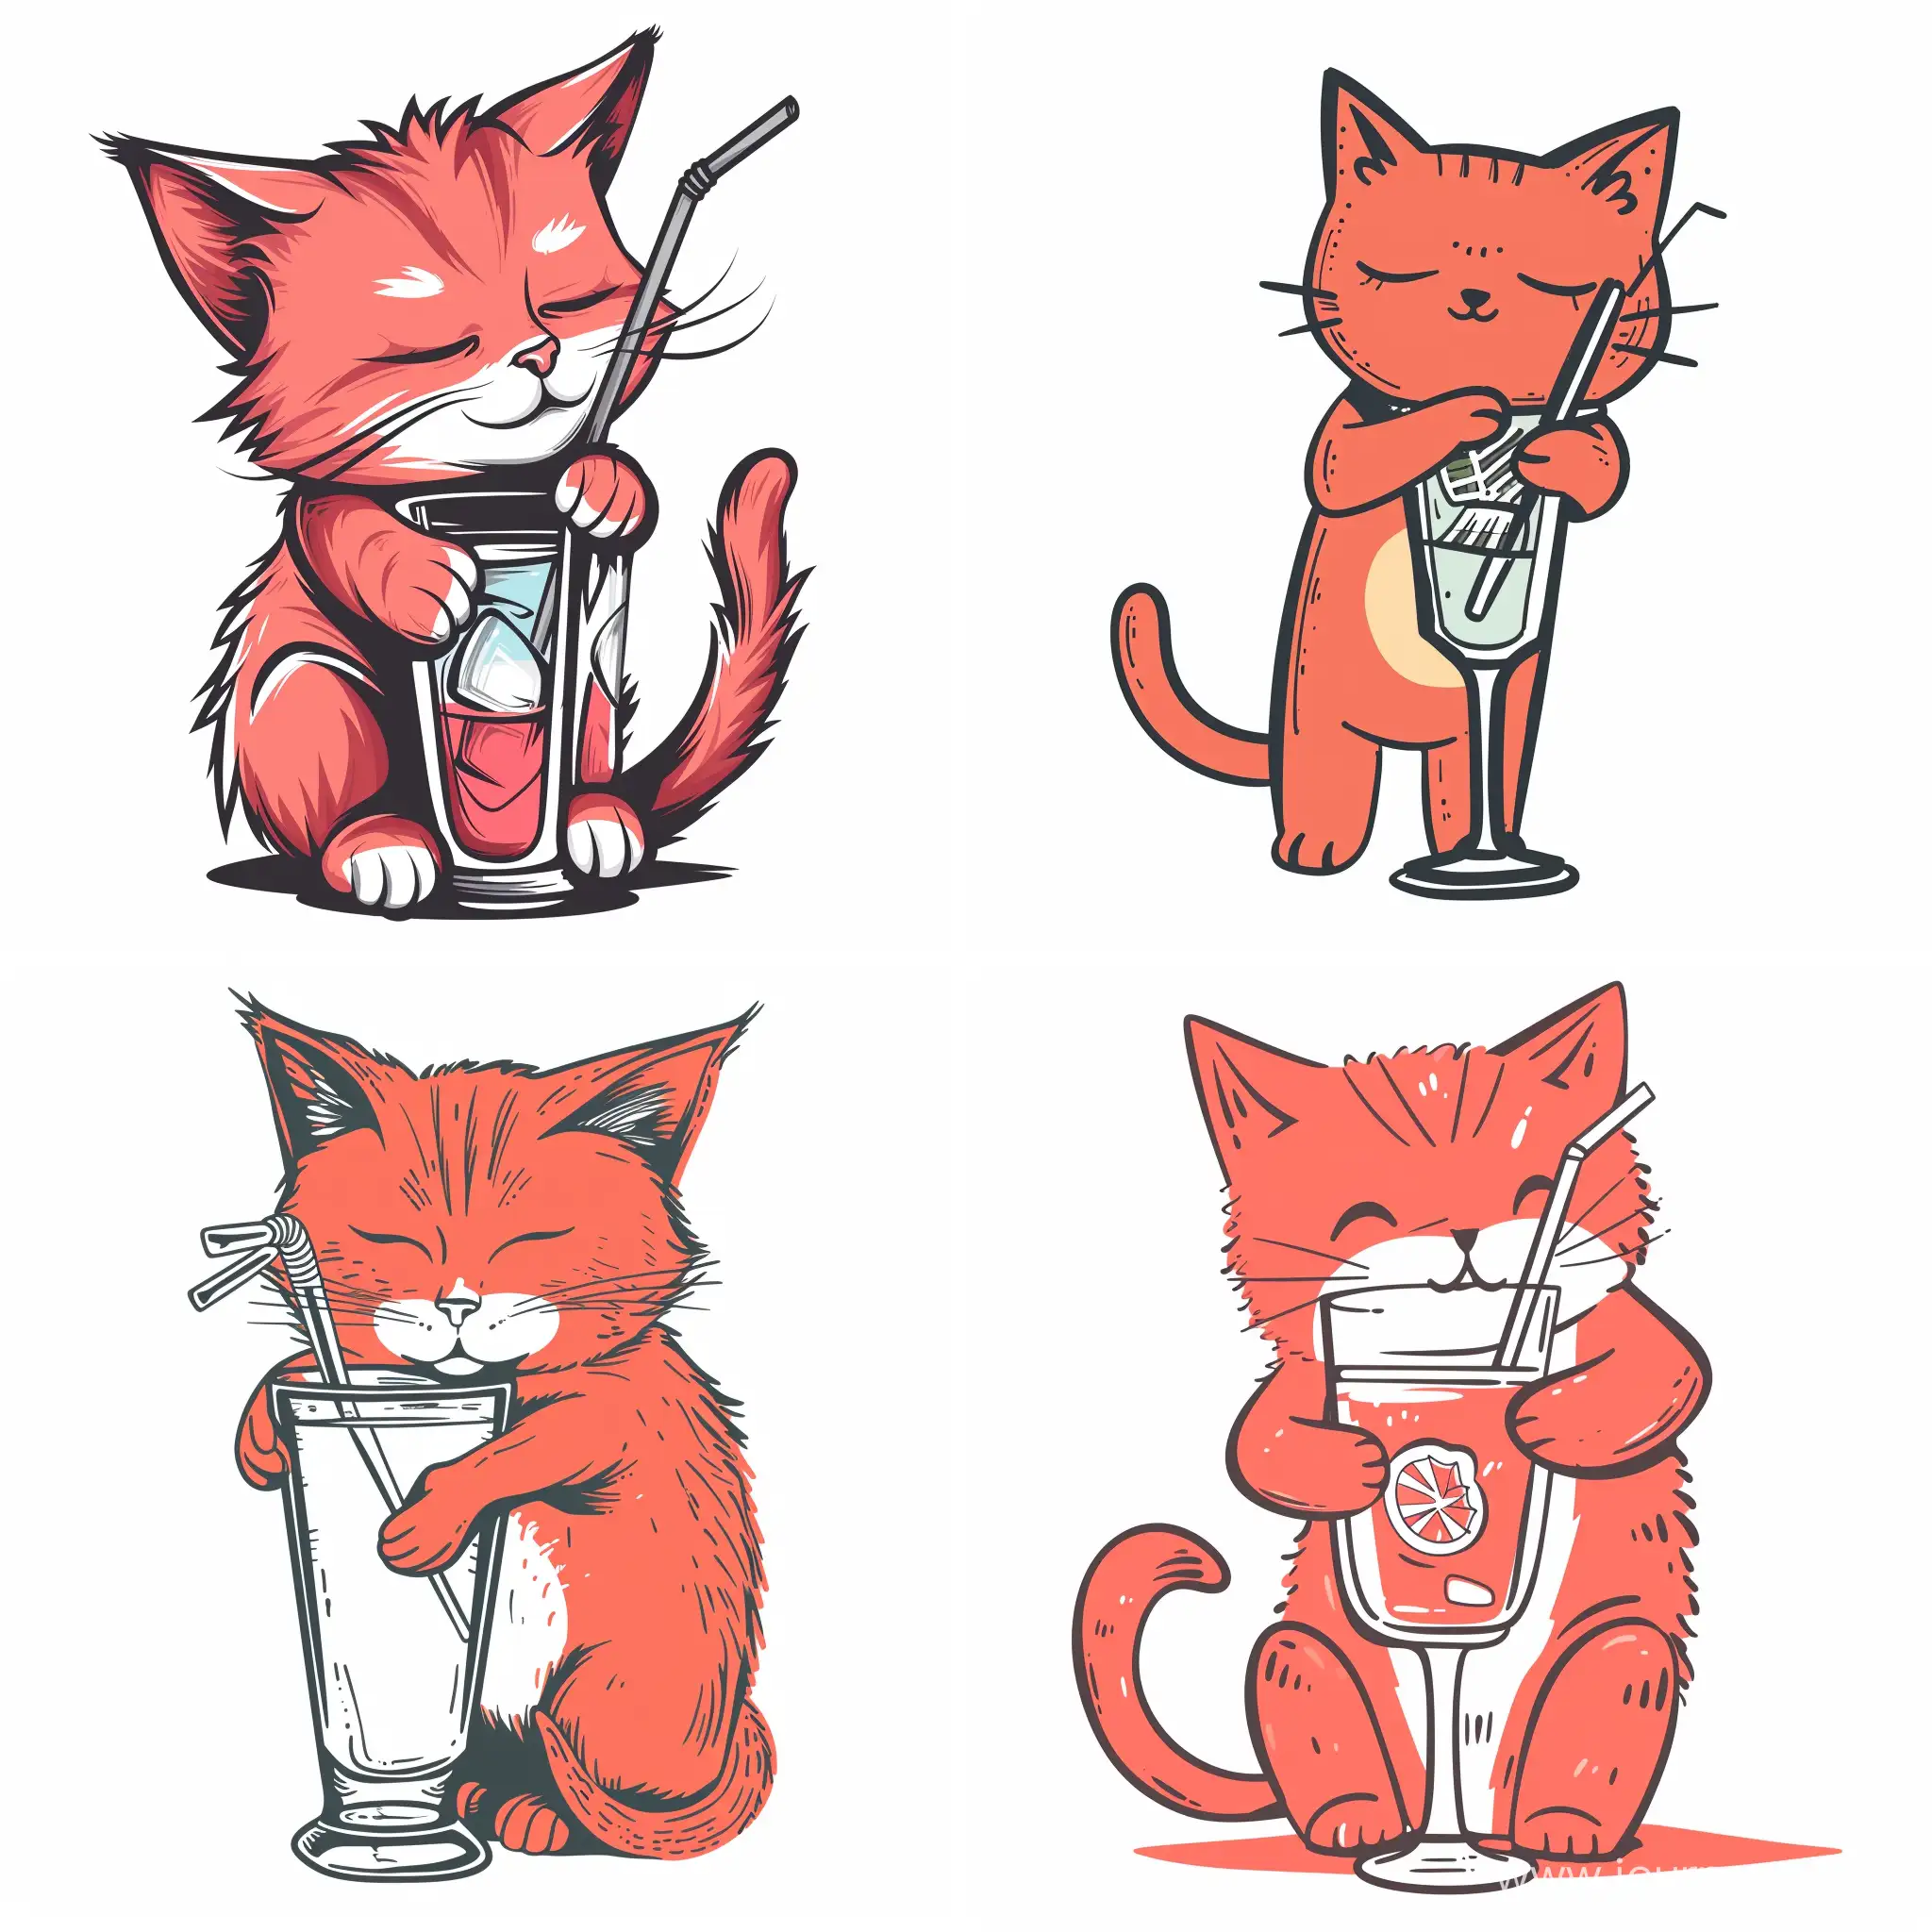 A very minimalistic cartoon monochrome red kitten hugging a glass with a cocktail and a straw on a white background